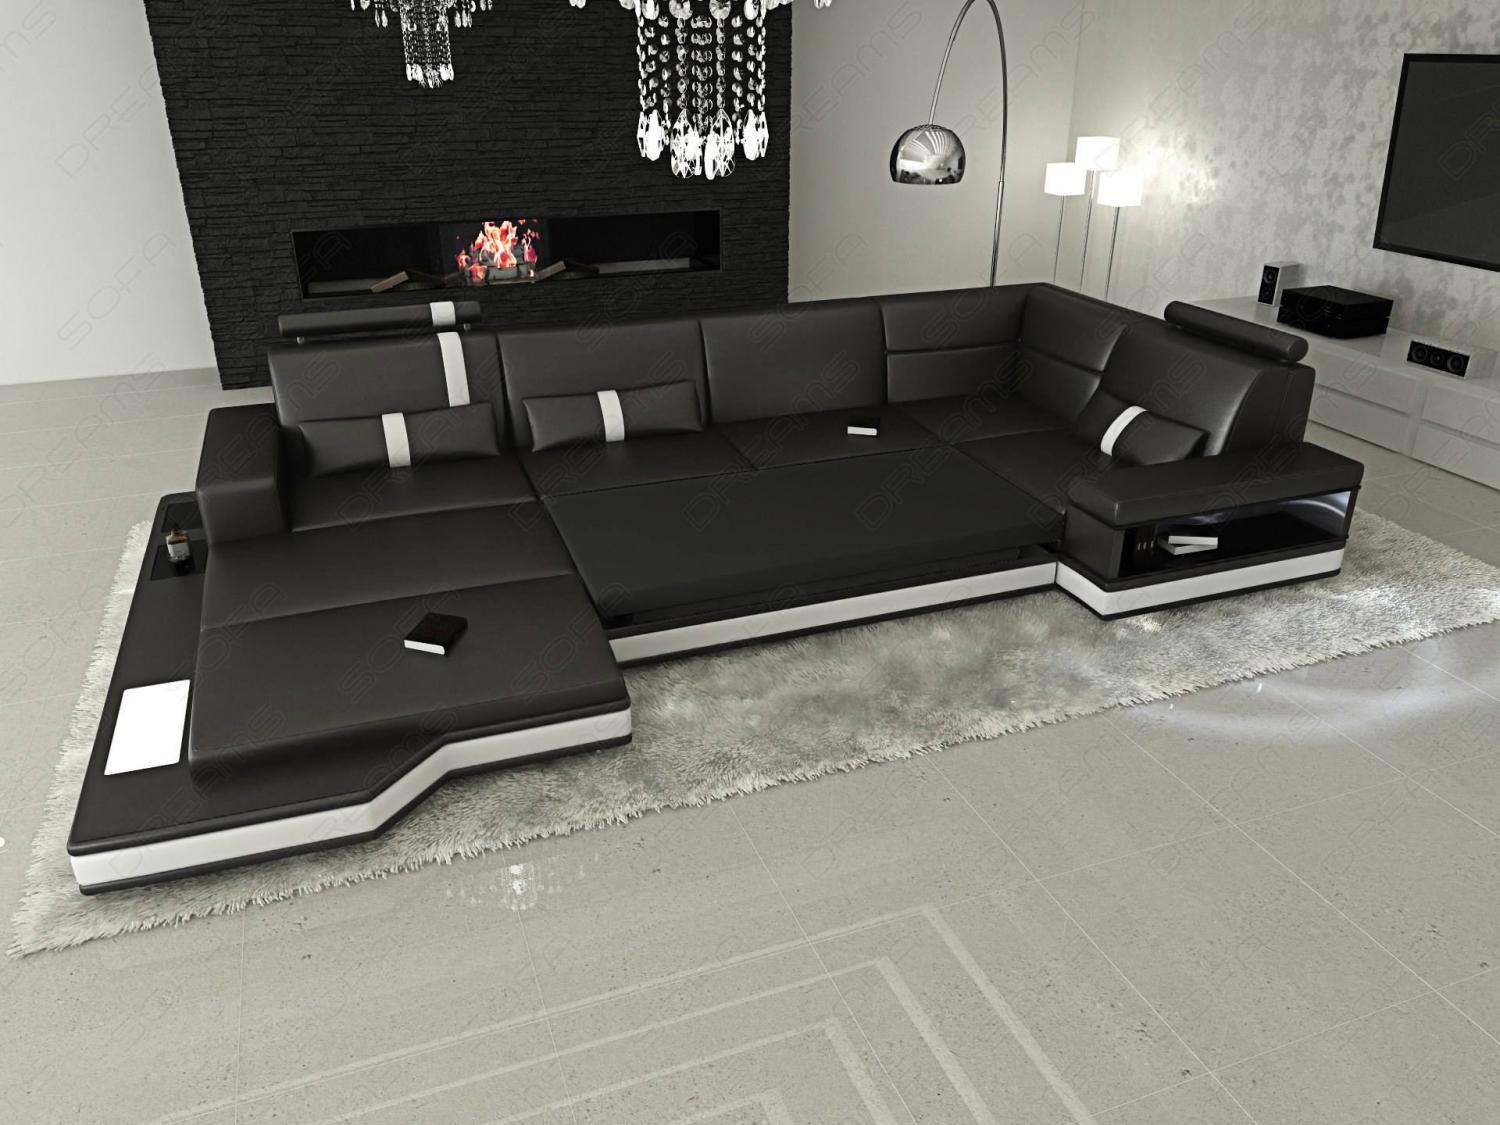 Ultimate Sectional Sofa - Futuristic Modern Sectional Leather Couch By SofaDreams - Giant Luxury Sectional Sofa